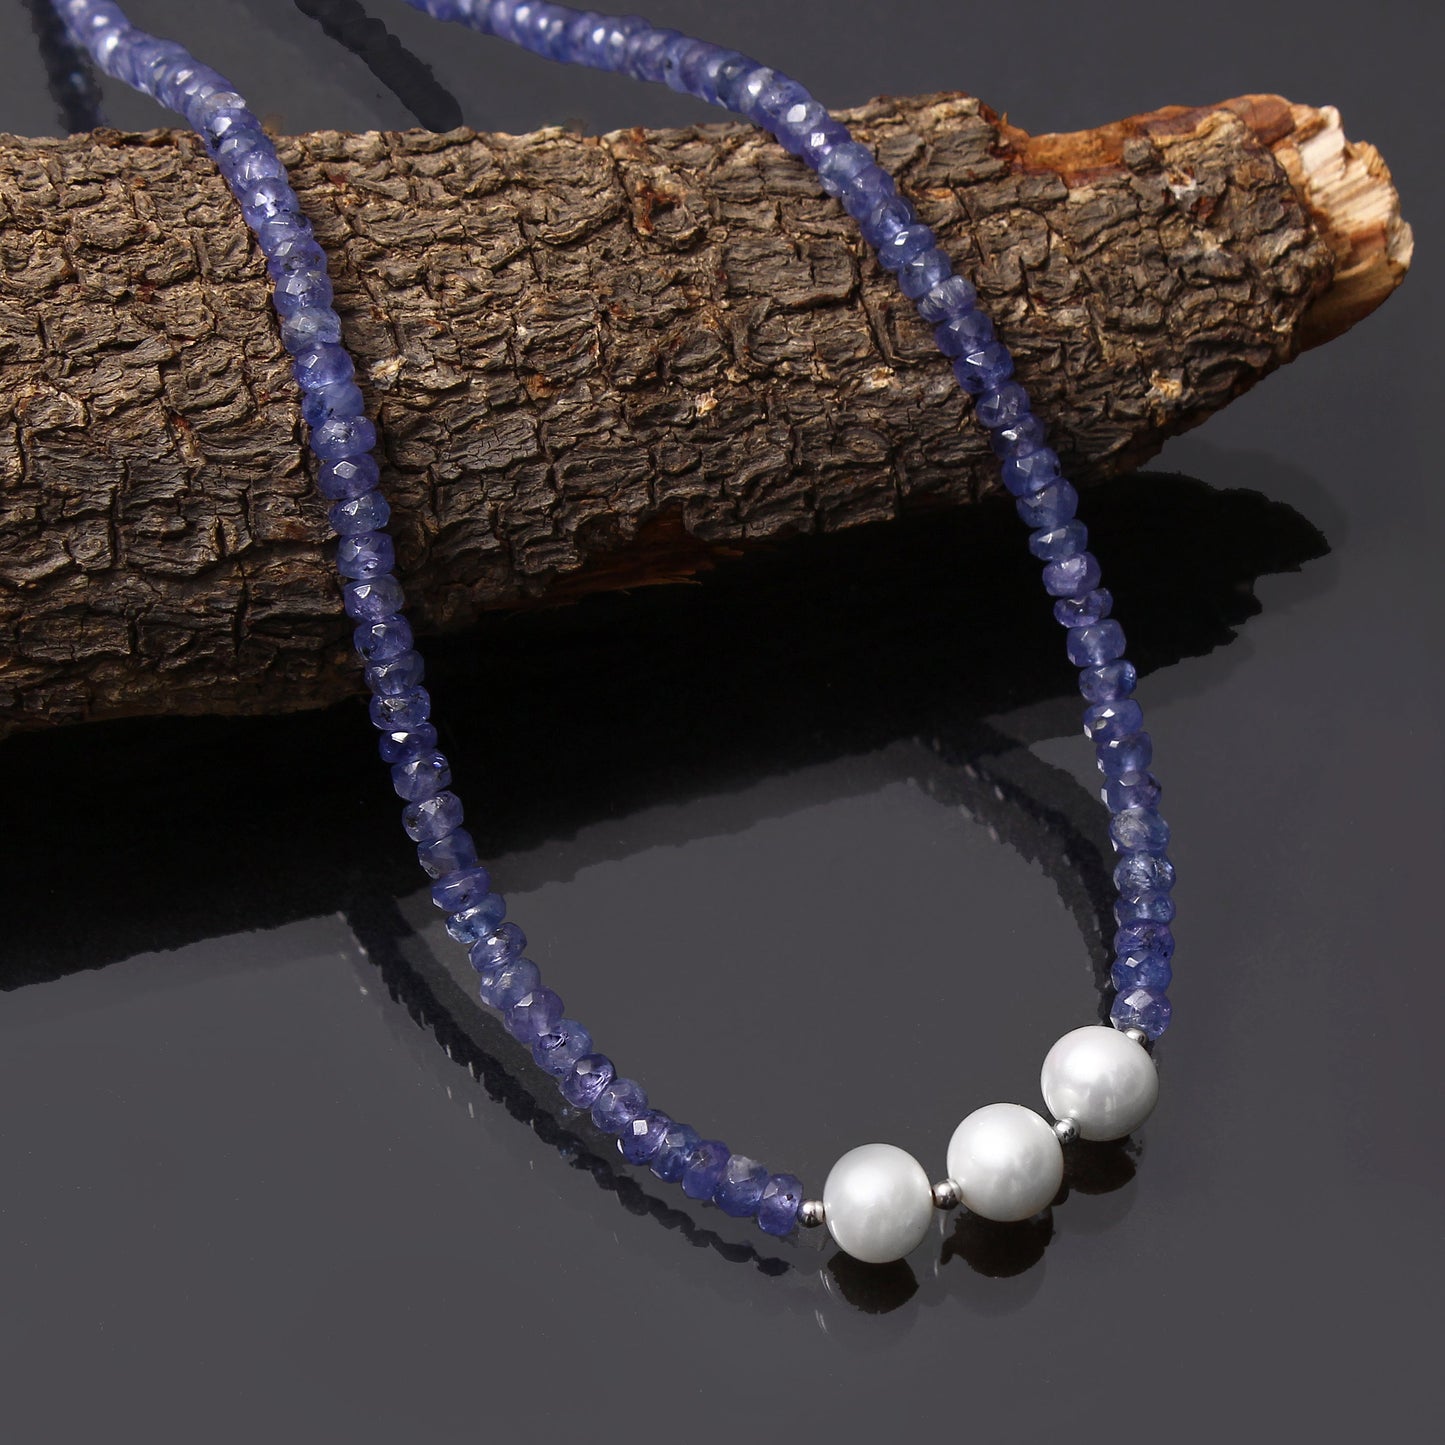 Stylish Tanzanite & Pearl Beaded Necklace ,Birthstone Natural Dual Stone Necklace, Gift for Love. GemsRush